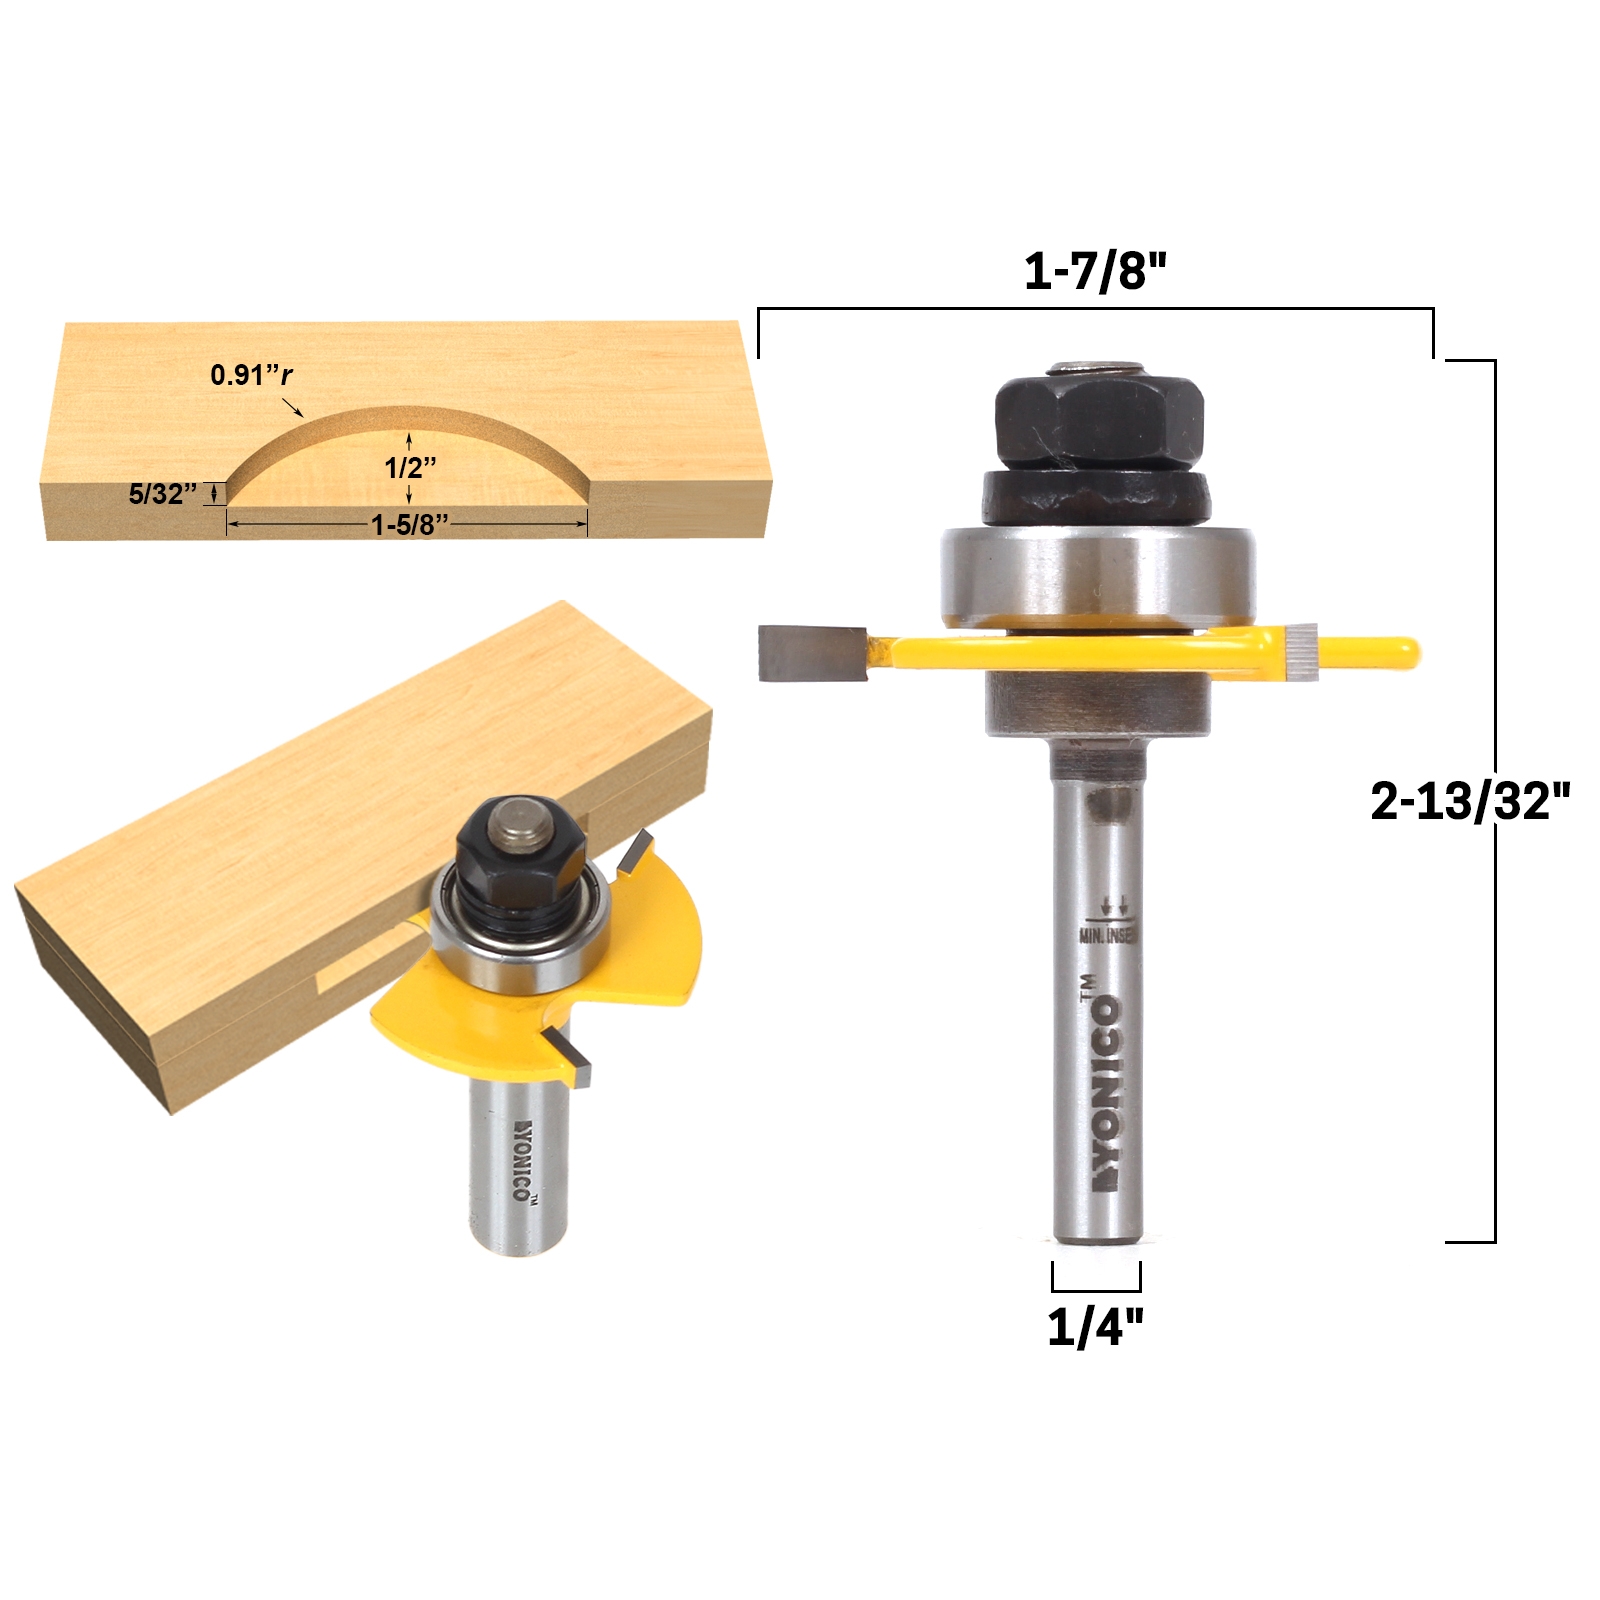 1/2" Shank Biscuit Cutter Router Bit No.10 & 20 TCT biscuit Joiner Set 